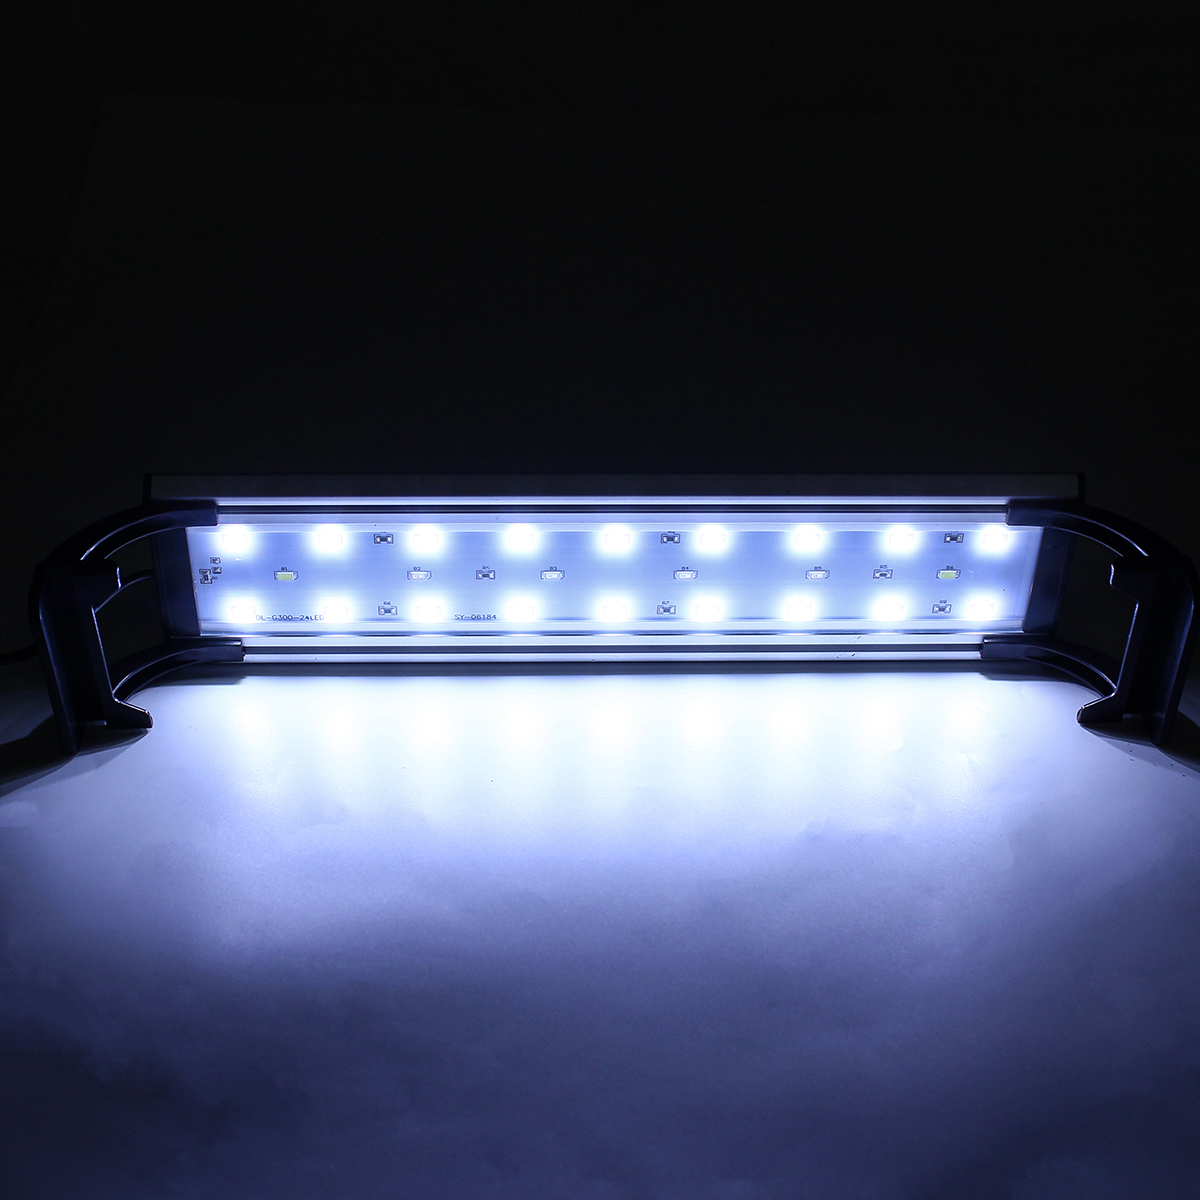 Dimmable--Timer-LED-Fish-Tank-Light-Lamp-Hood-Aquarium-Lighting-with-Extendable-Brackets-for-30CM-Ta-1639937-9